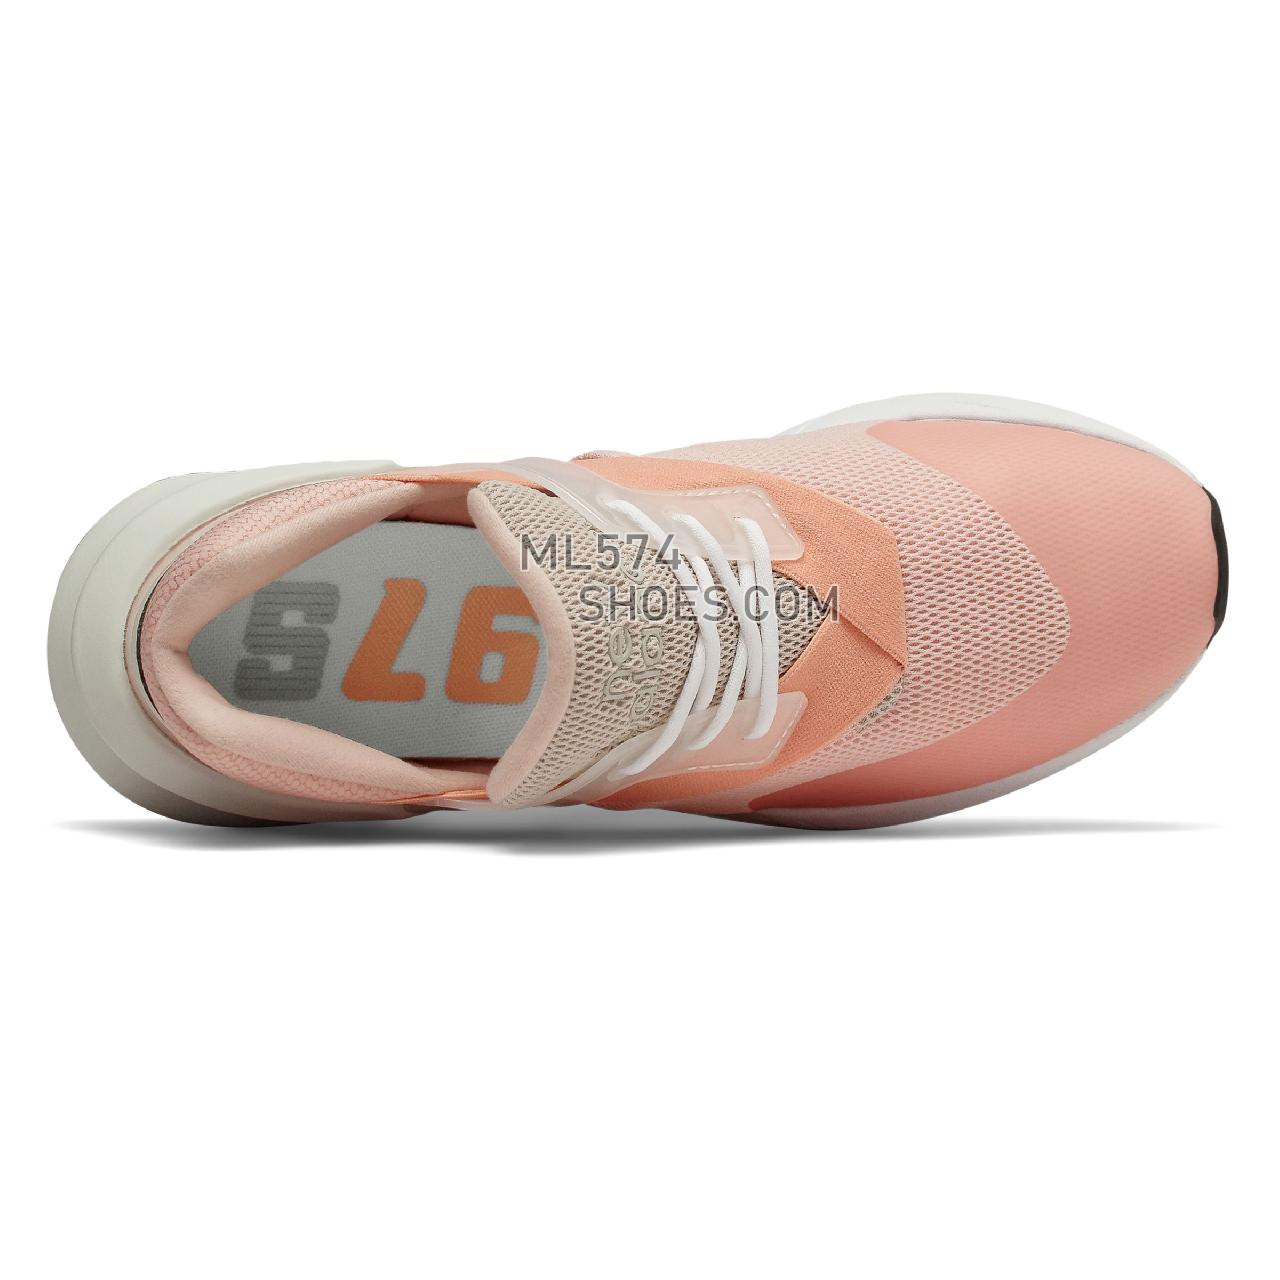 New Balance 997 Sport - Women's Sport Style Sneakers - Oyster Pink with Faded Copper - WS997WHC